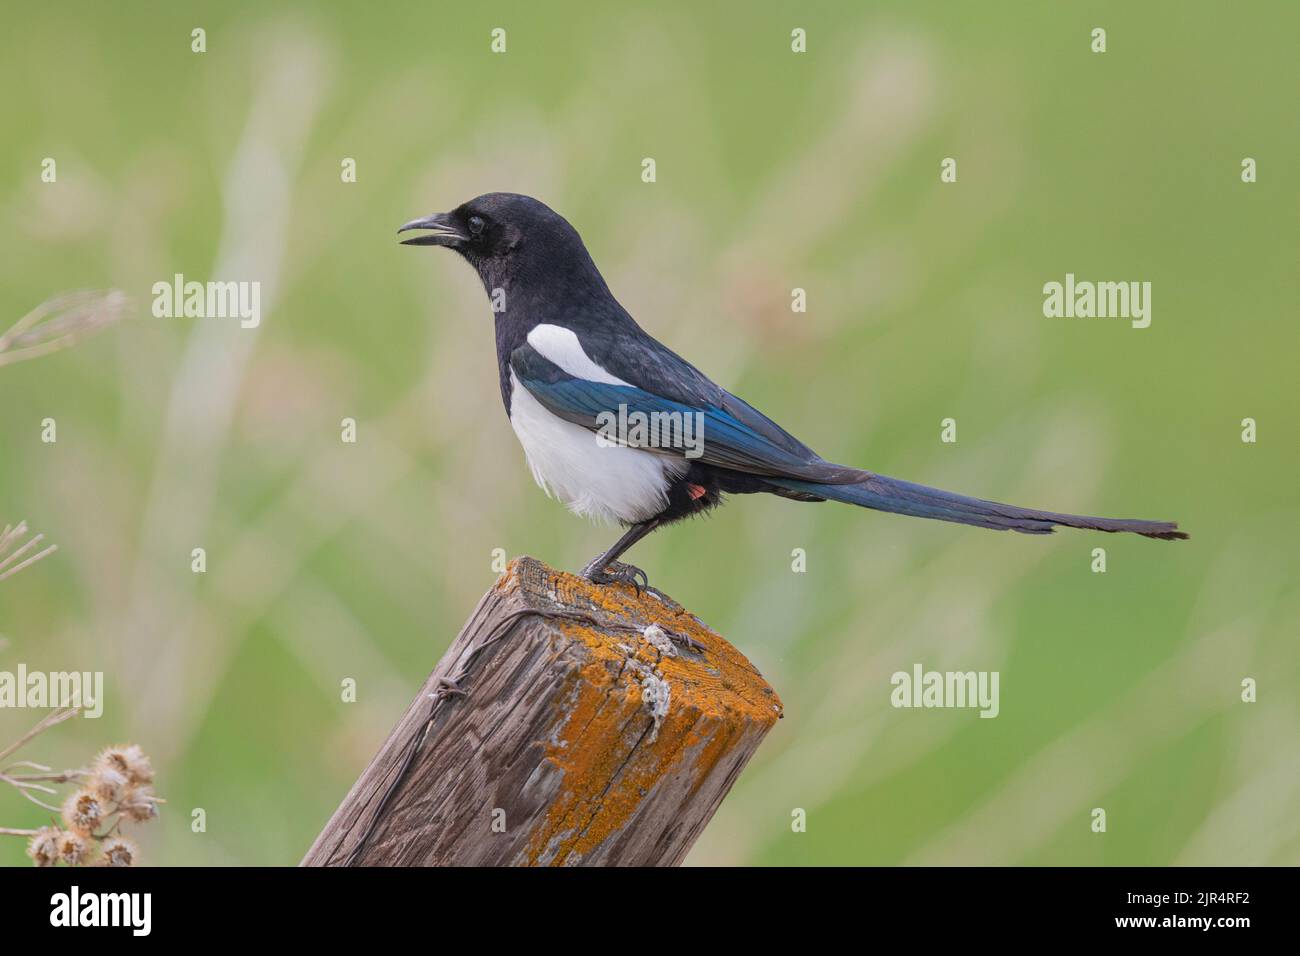 Black-billed magpie, American magpie (Pica hudsonia), perched on a wooden post calling, Canada, Manitoba, Riding Mountain National Park Stock Photo